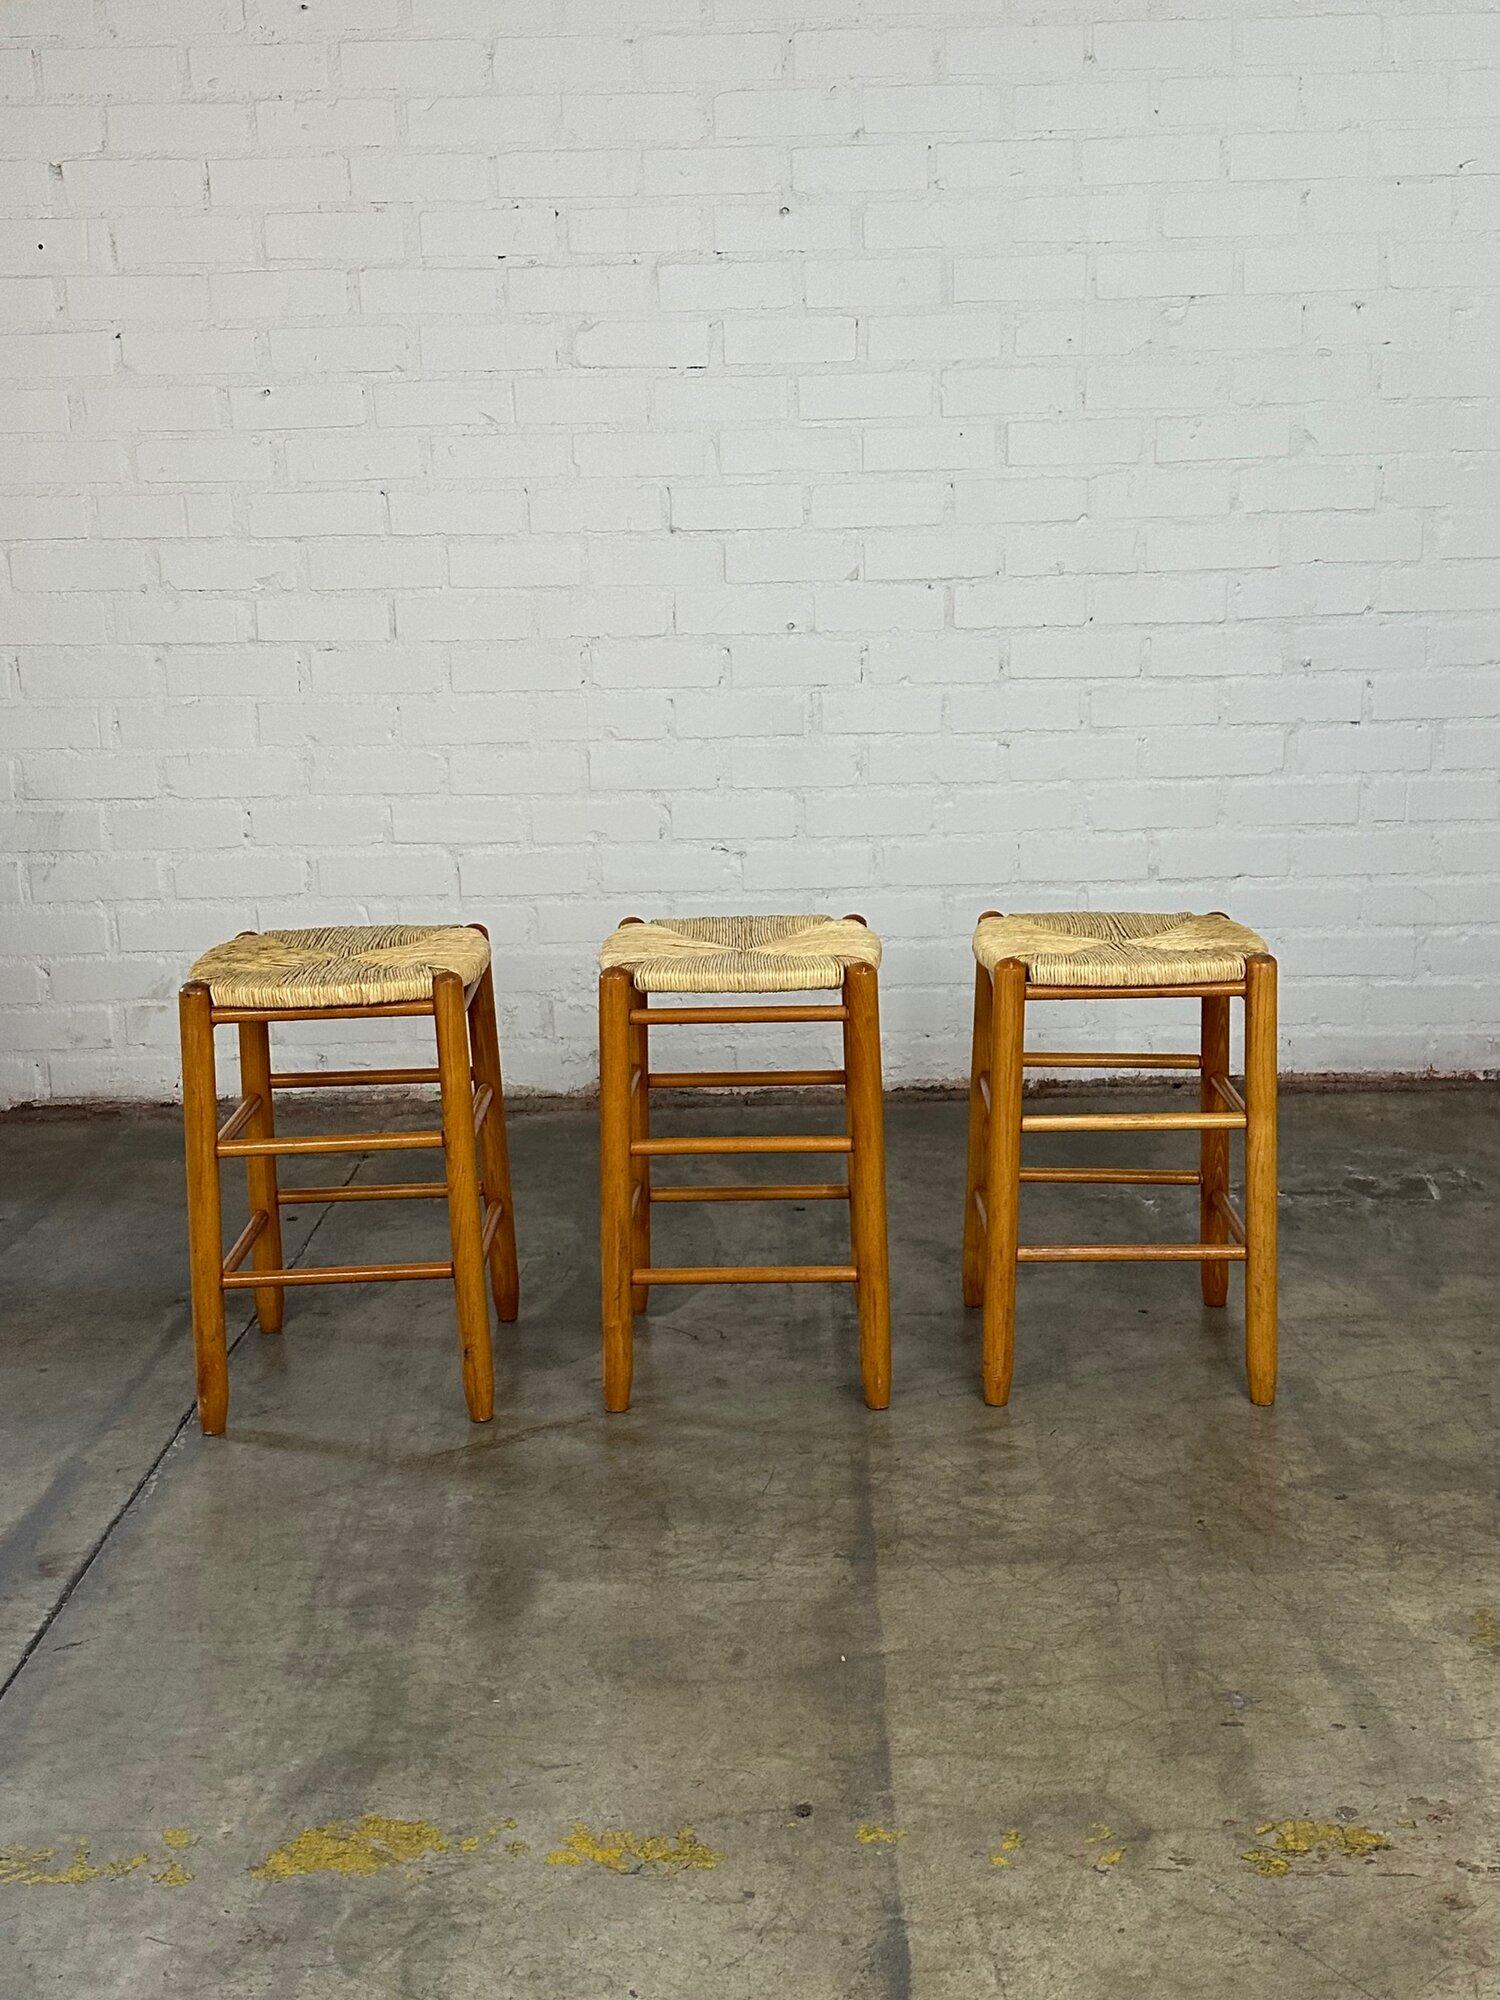 W15 D15 H23.5 SW15 SD15 SH23.5

Vintage stool in overall good condition with one minor area of wear pictured closely. The set is structurally sound and overall shows well. Price is for the set of three.